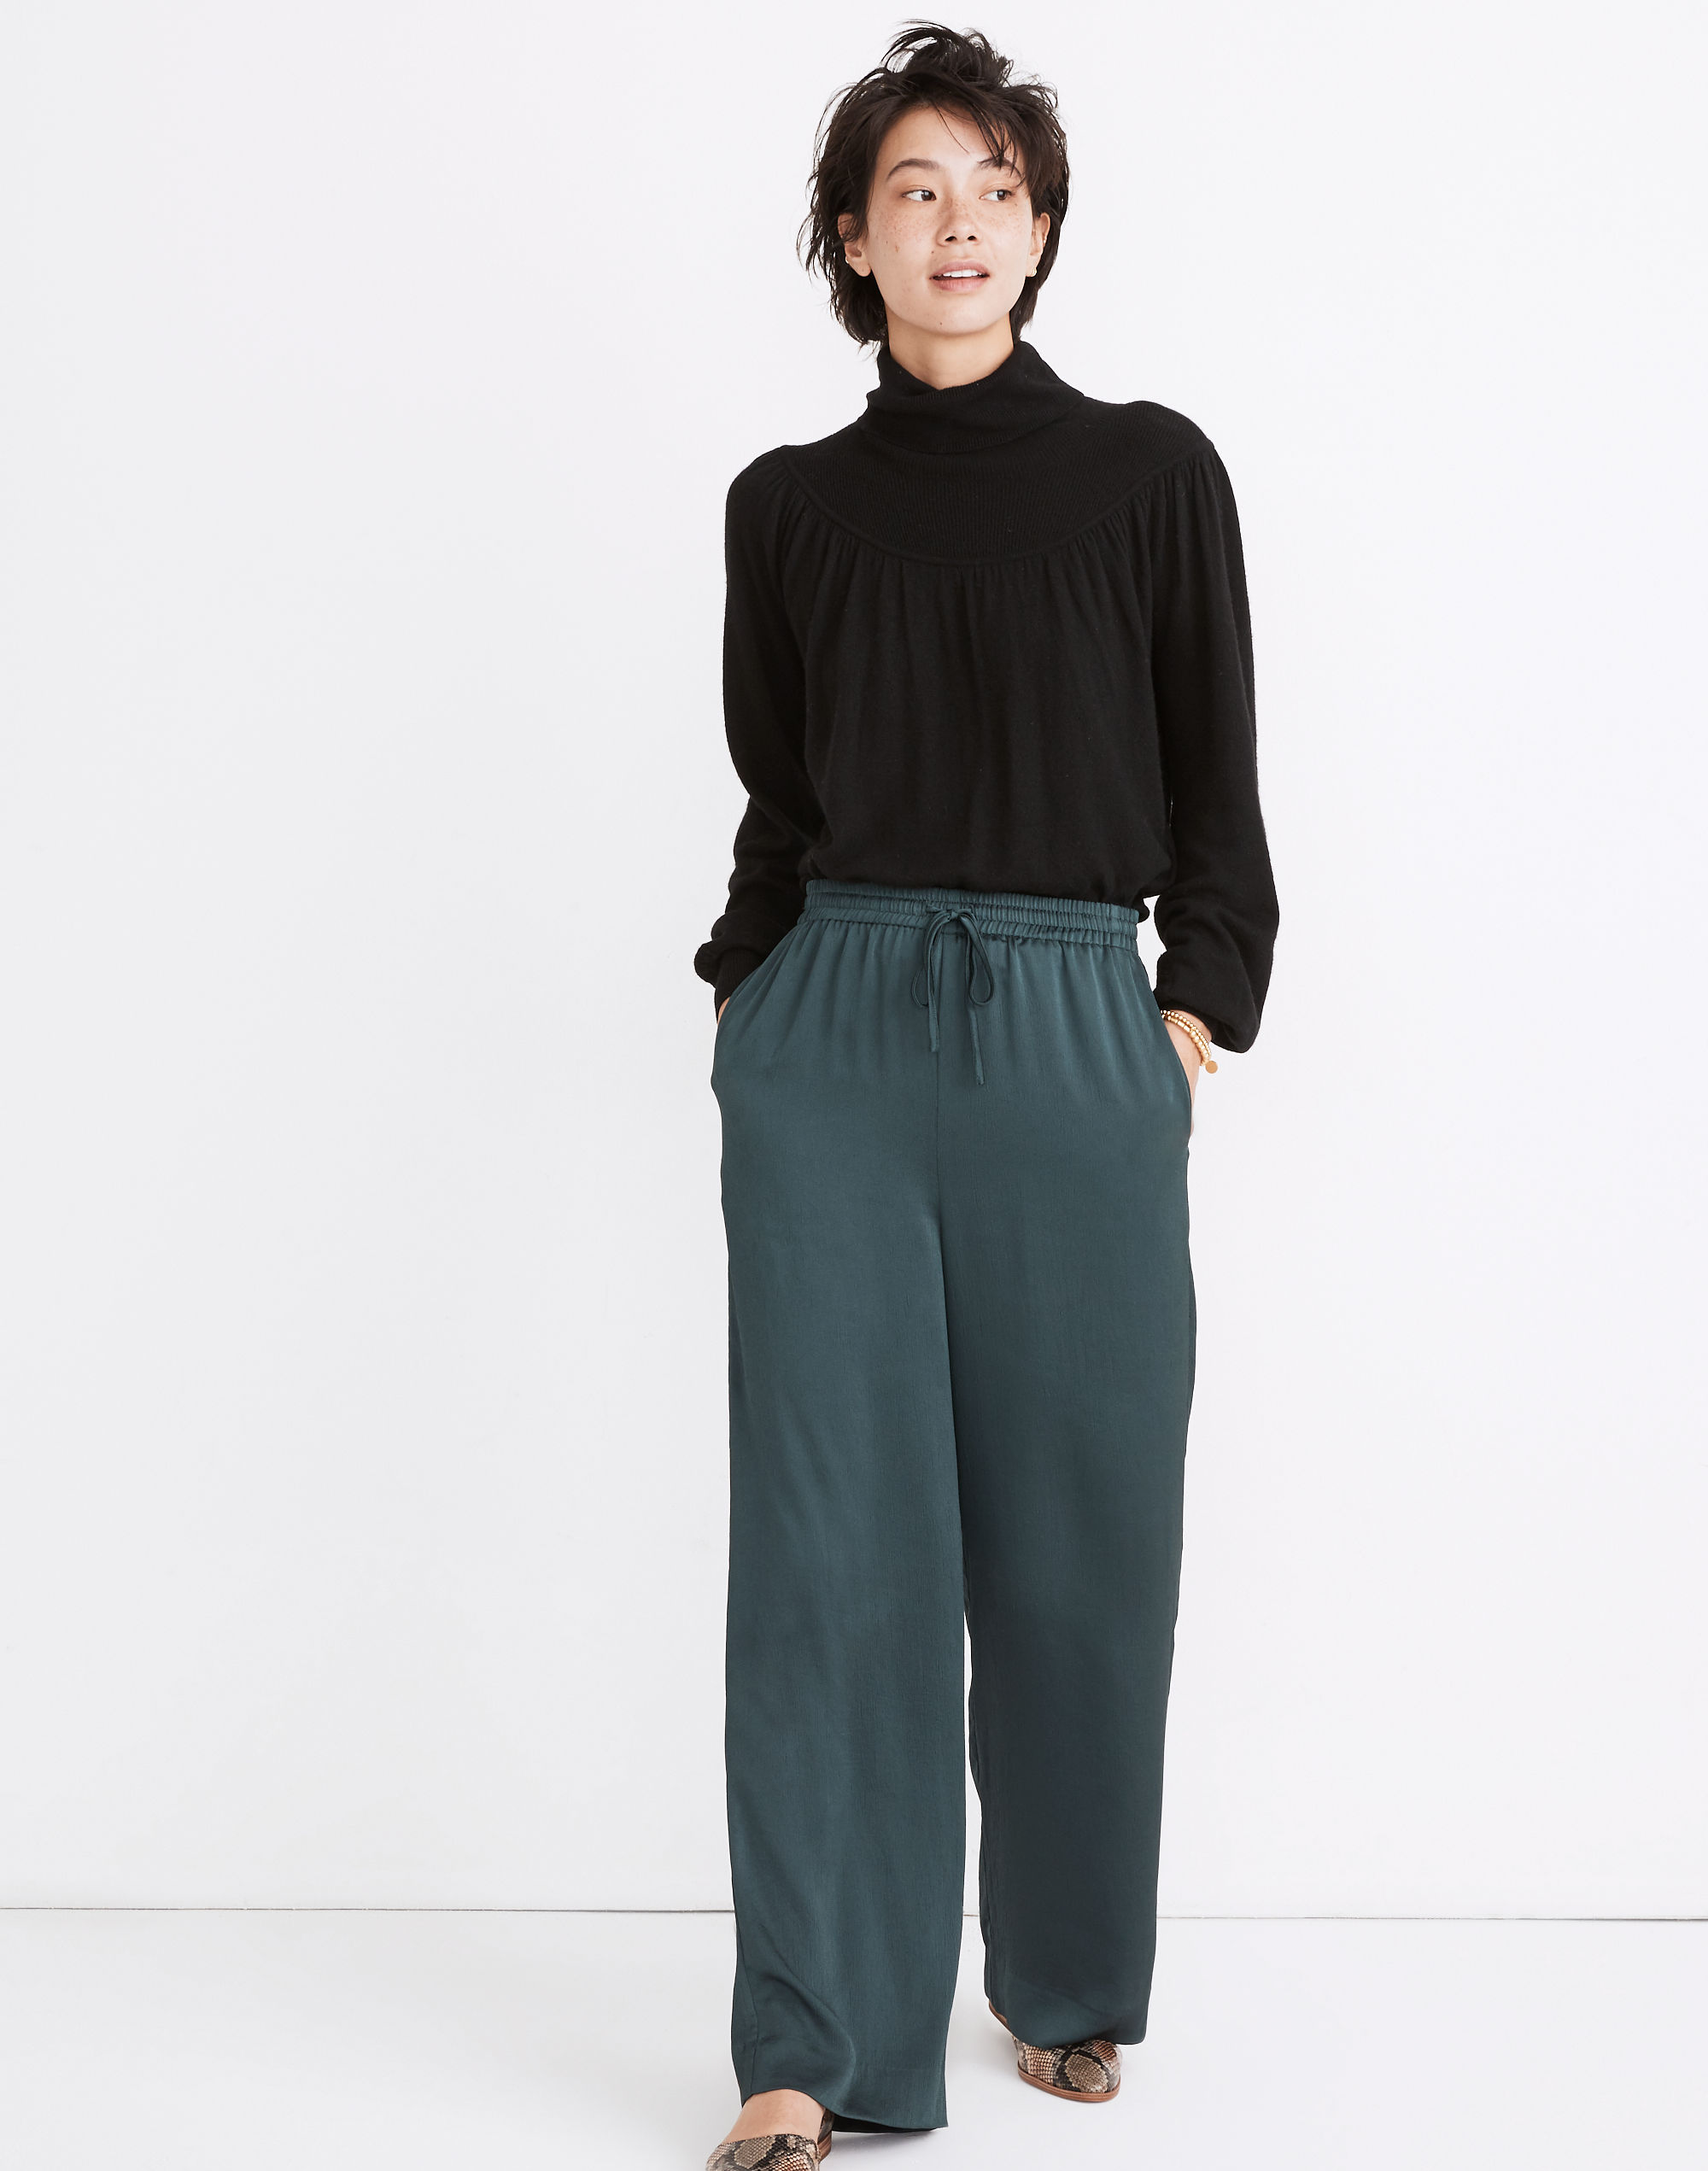 This phenomenal pair of viscose pants from Madewell (I thrifted